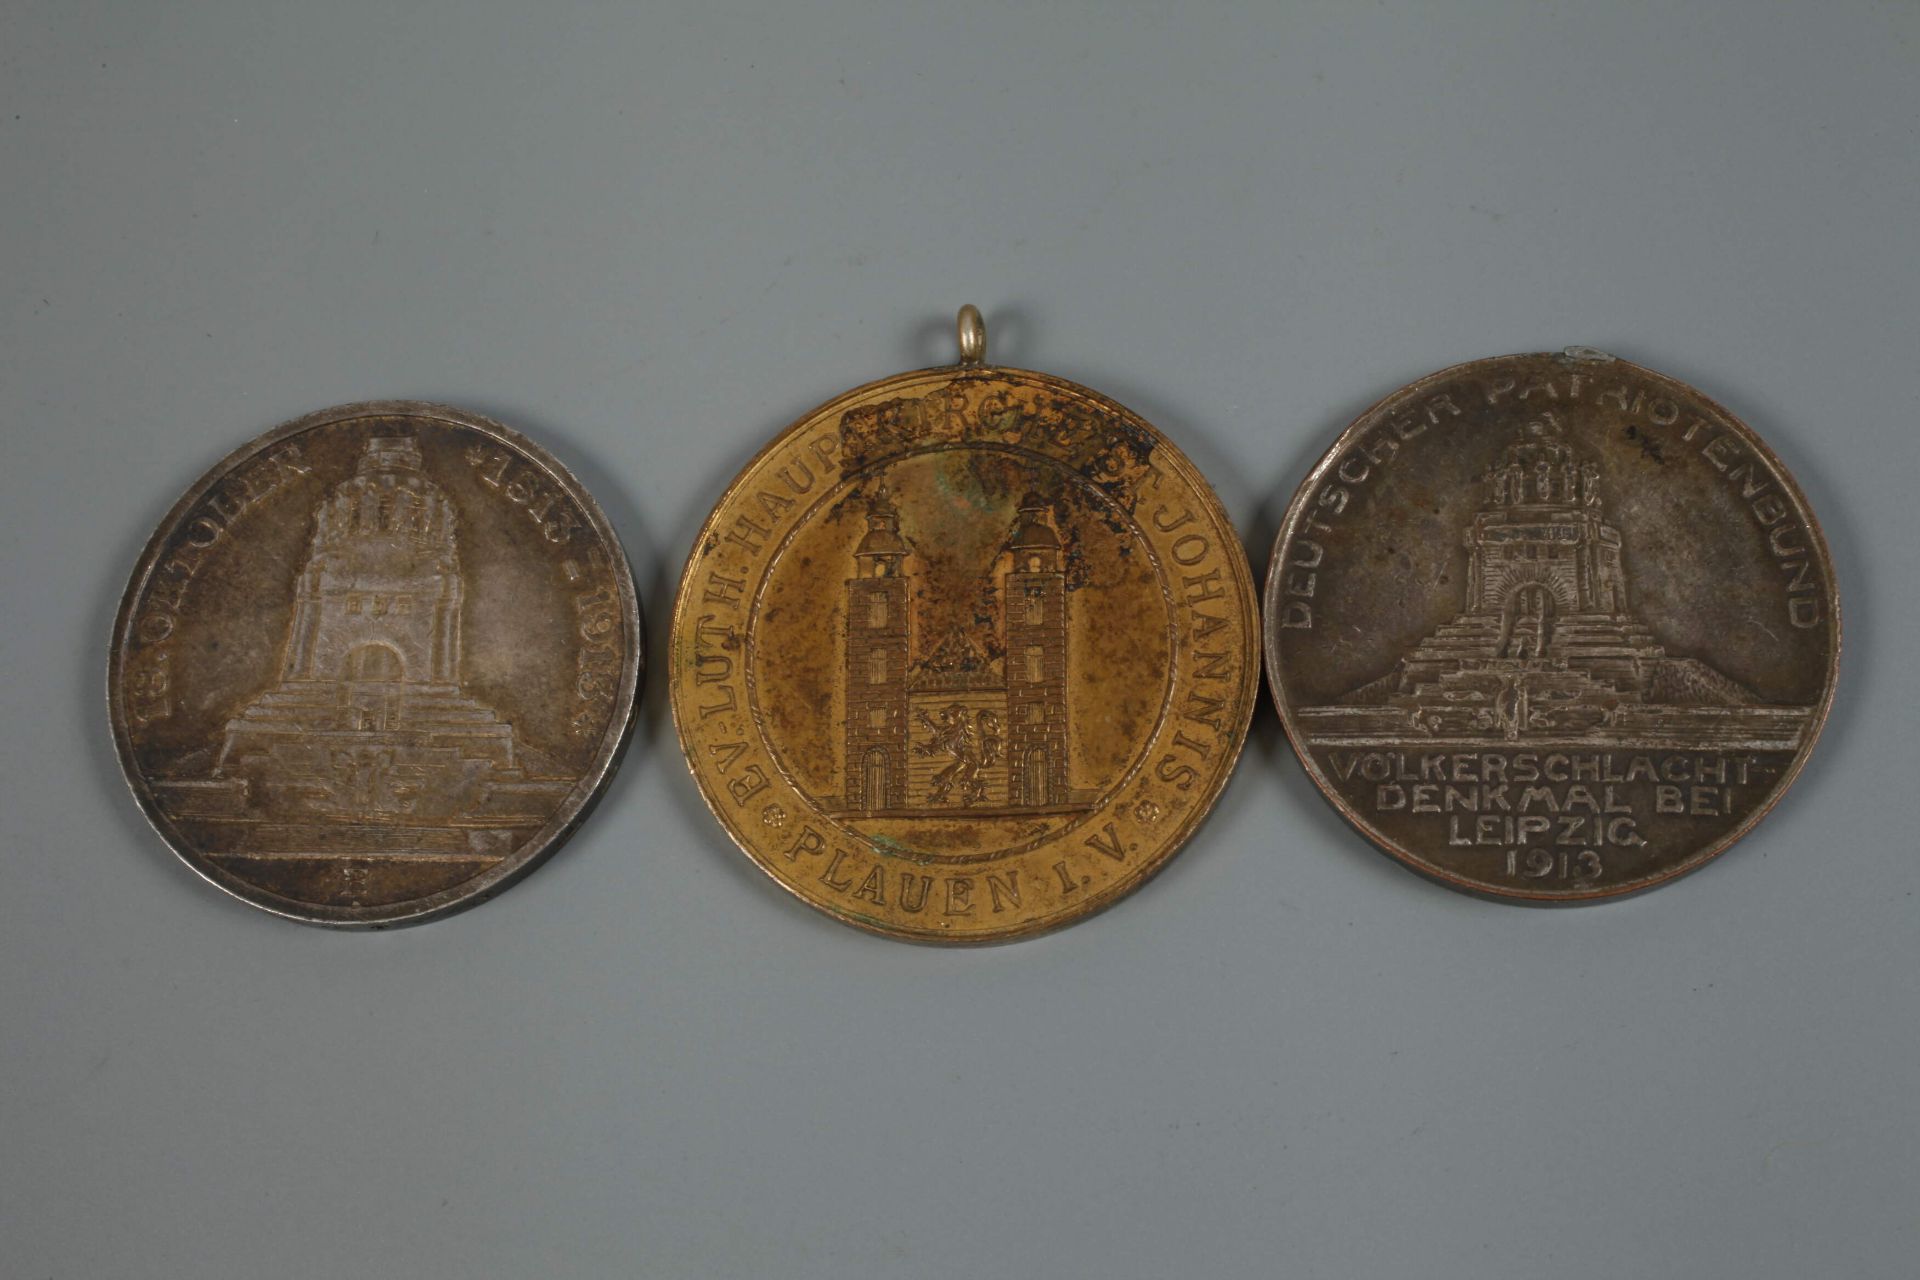 Convolute Silver Coins German Reich - Image 2 of 3